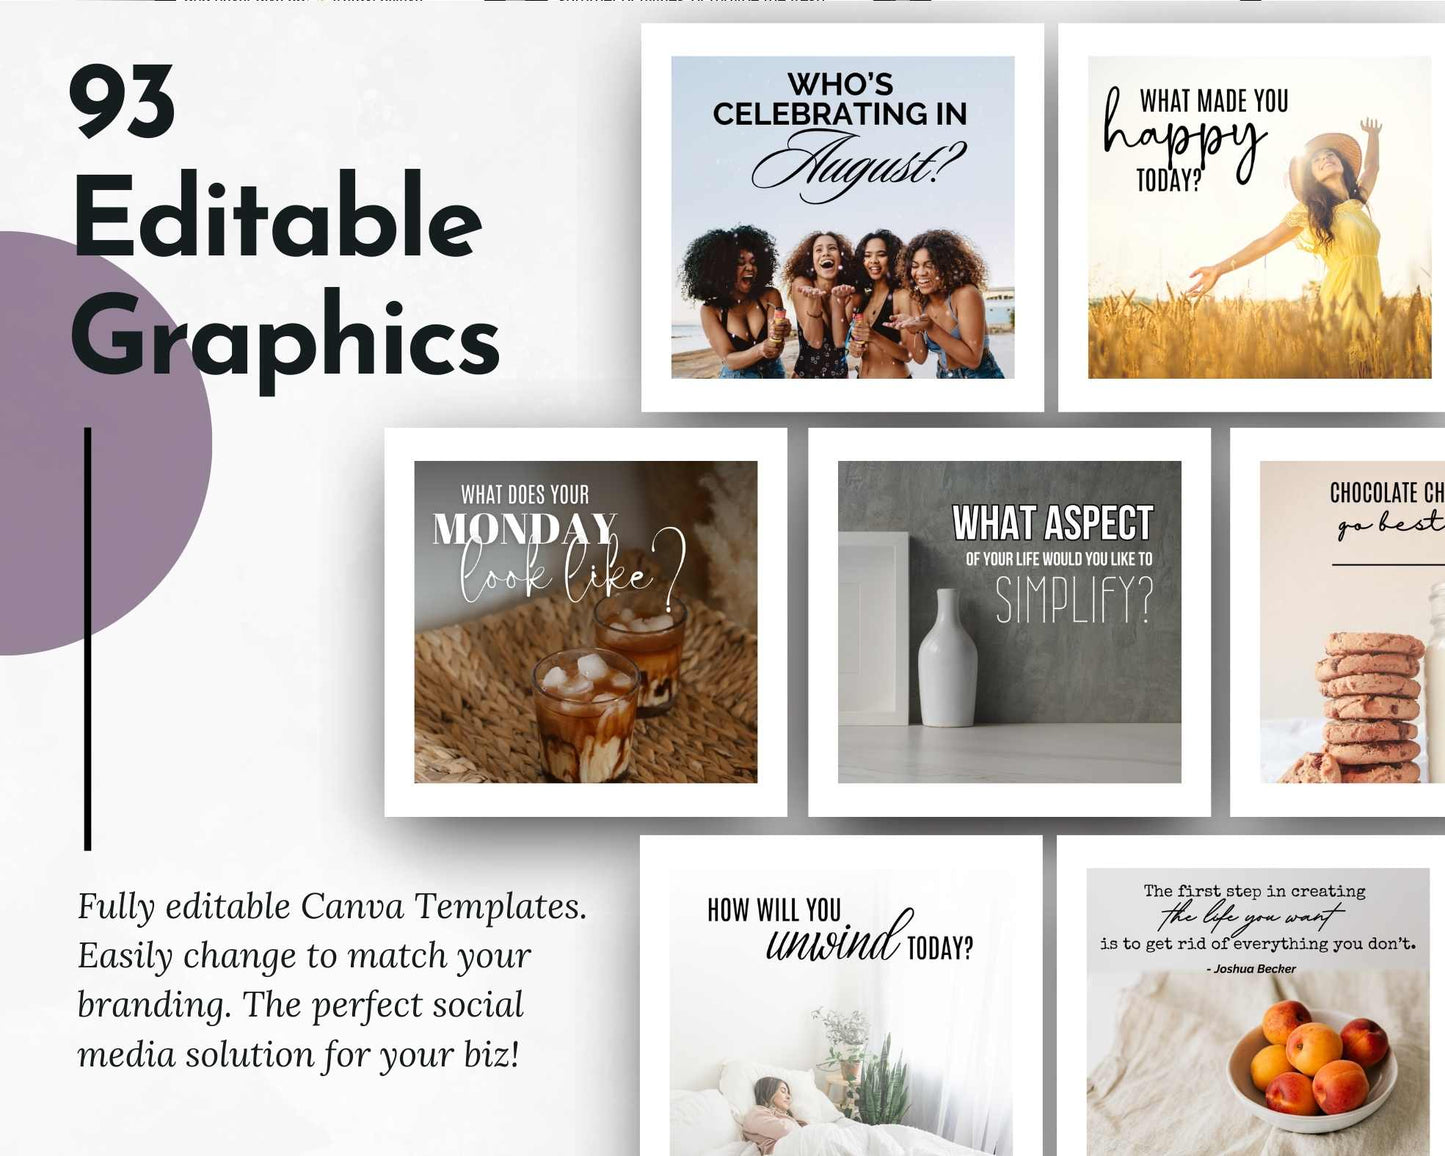 A collection of 93 editable Canva templates featuring various inspirational and lifestyle graphics, perfect for enhancing your social media presence. Includes prompts like "Who's celebrating in August?" and "What made you happy today?". Ideal for crafting engaging daily social media posts. Presenting the AUGUST Daily Posting Plan - Your Social Plan from Get Socially Inclined.